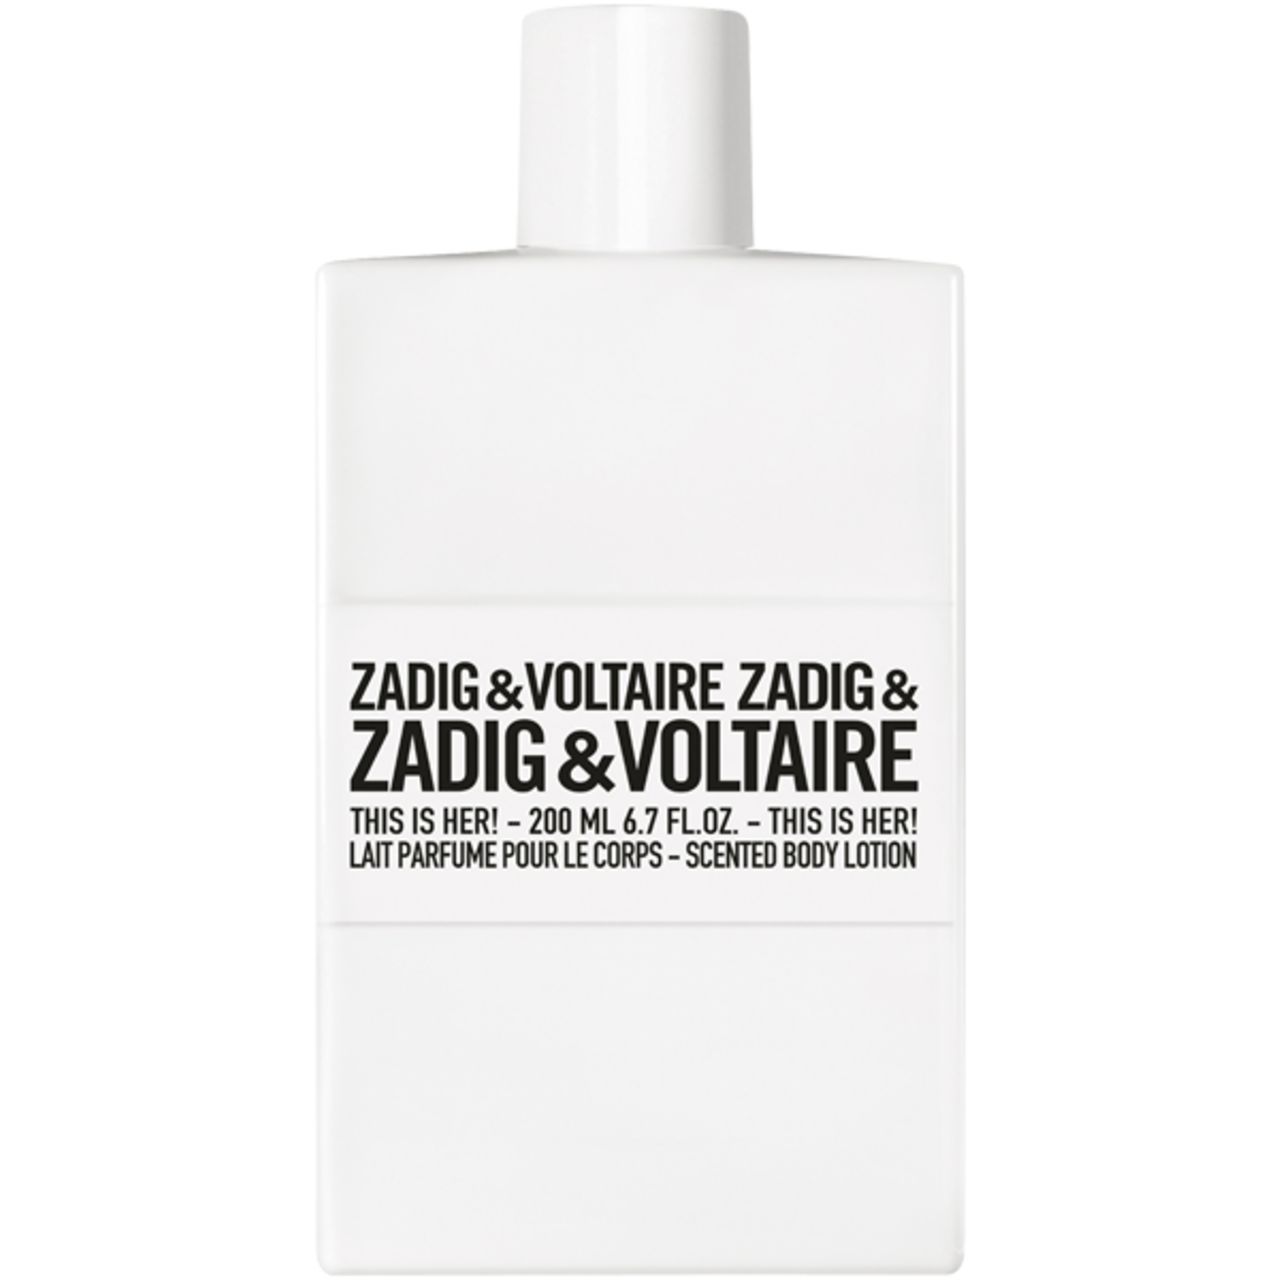 Zadig & Voltaire, This is Her! Scented Body Lotion